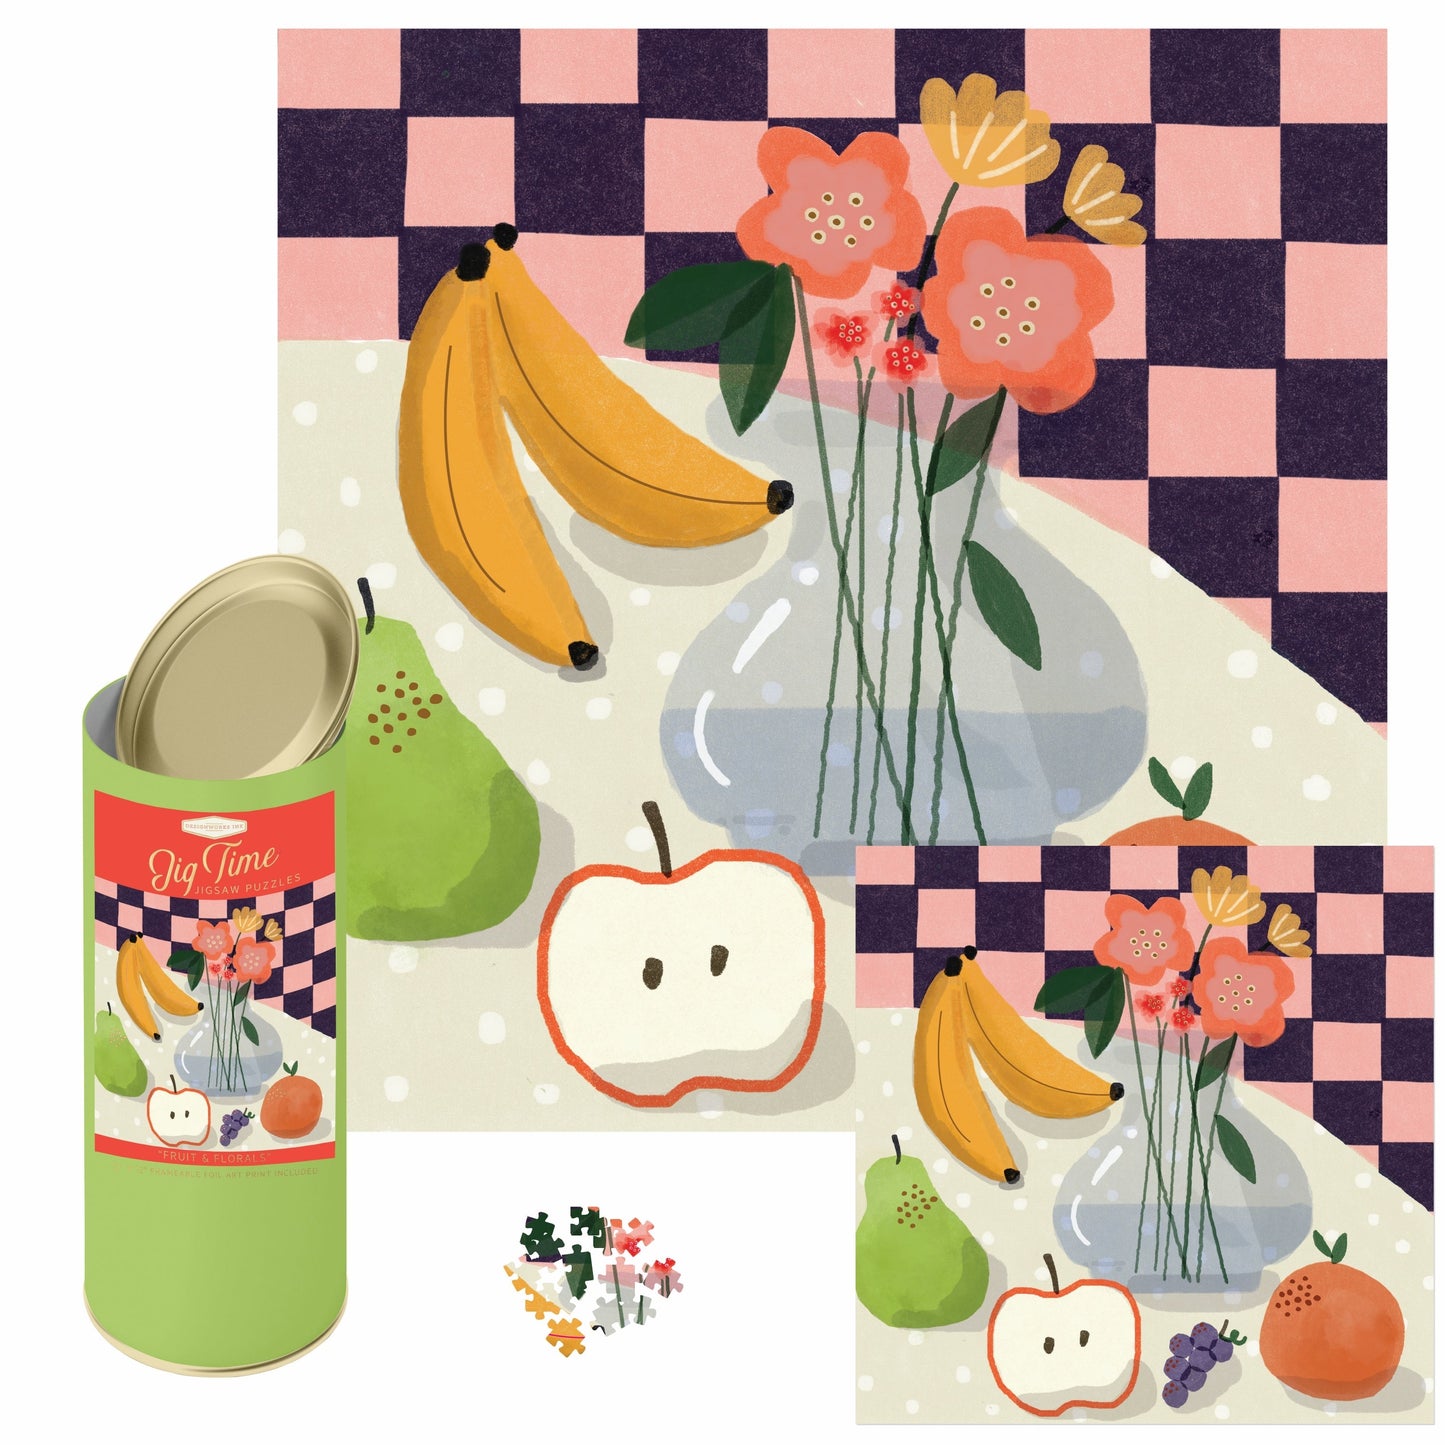 ThiThis puzzle features a fun and colourful arrangement of flowers and fruit with a checkerboard background.